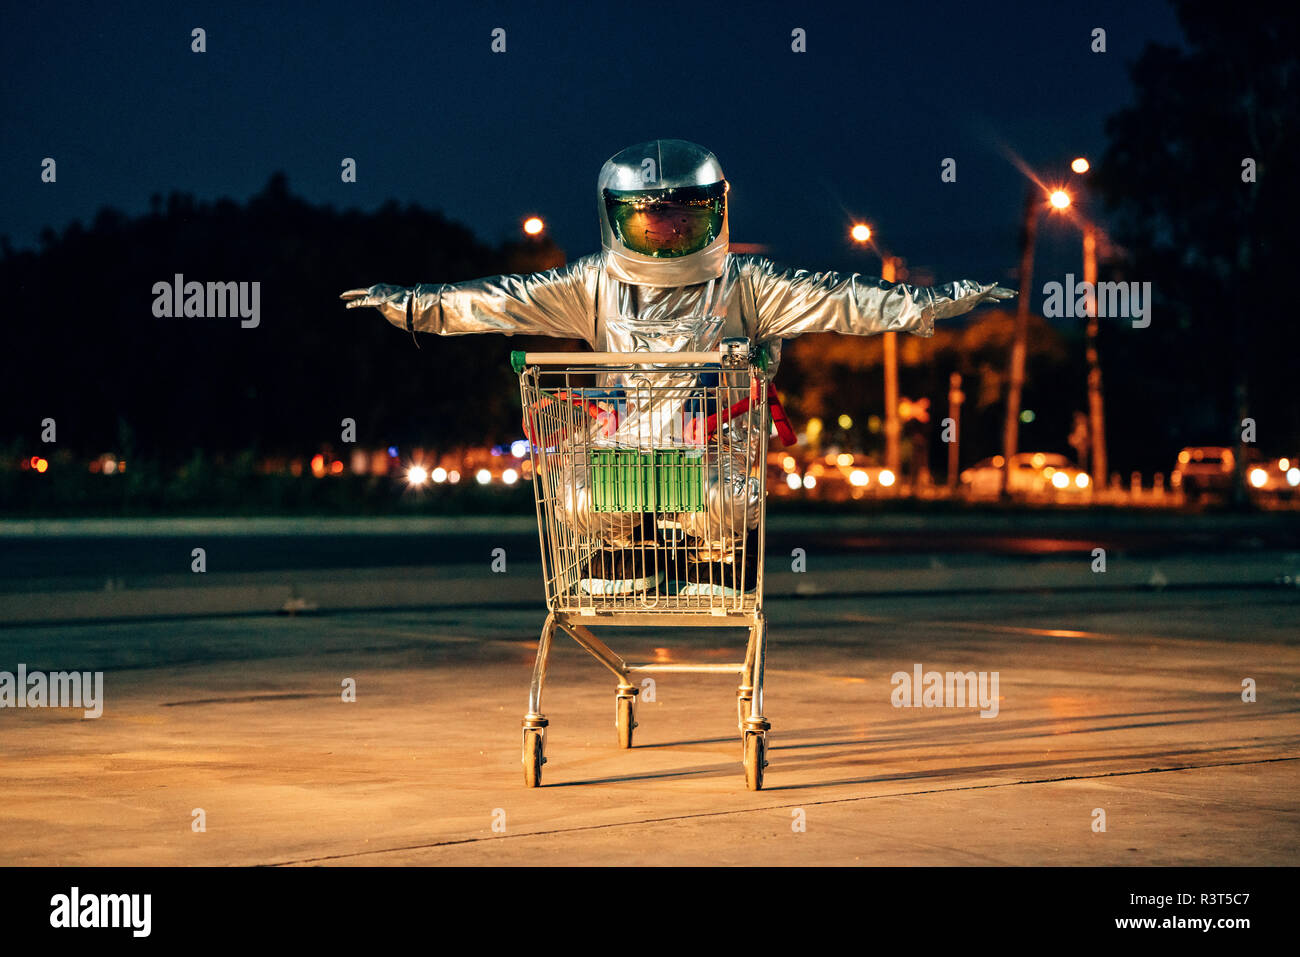 Spaceman in the city at night on parking lot inside shopping cart Stock Photo